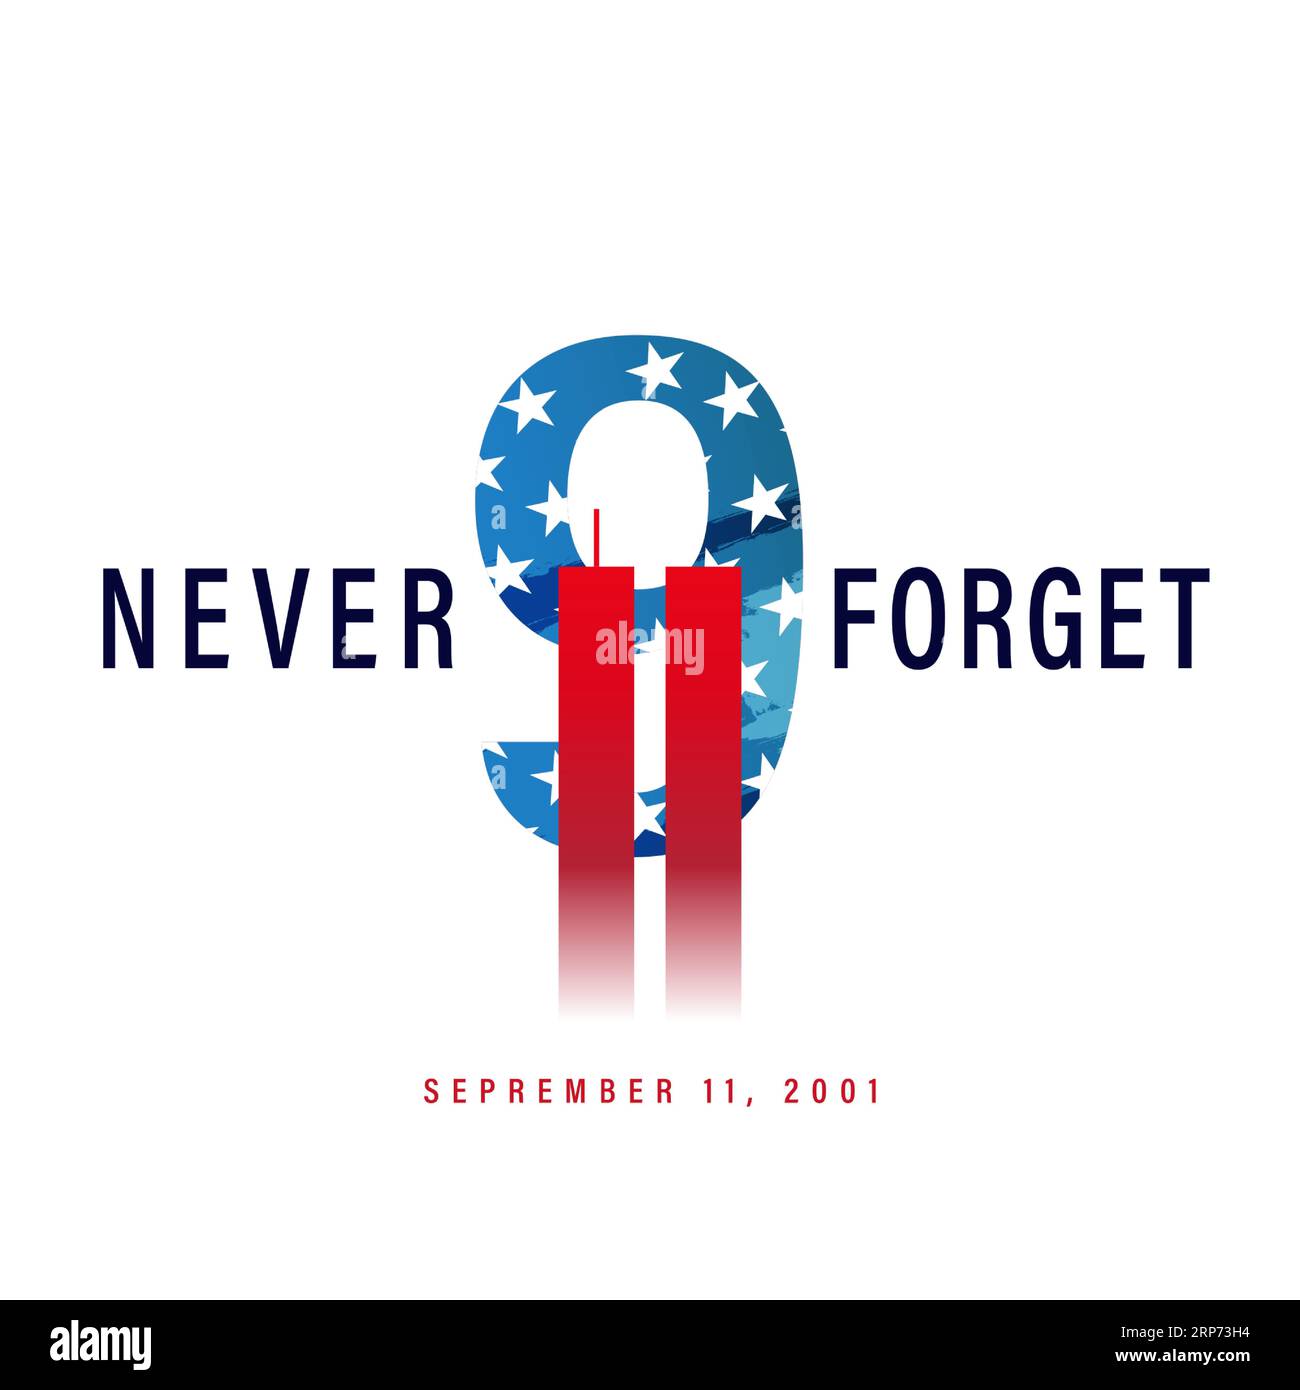 Never Forget 9/11 USA September 11, 2001. Patriot Day, We will Never Forget. Vector illustration for poster or social media banner Stock Vector